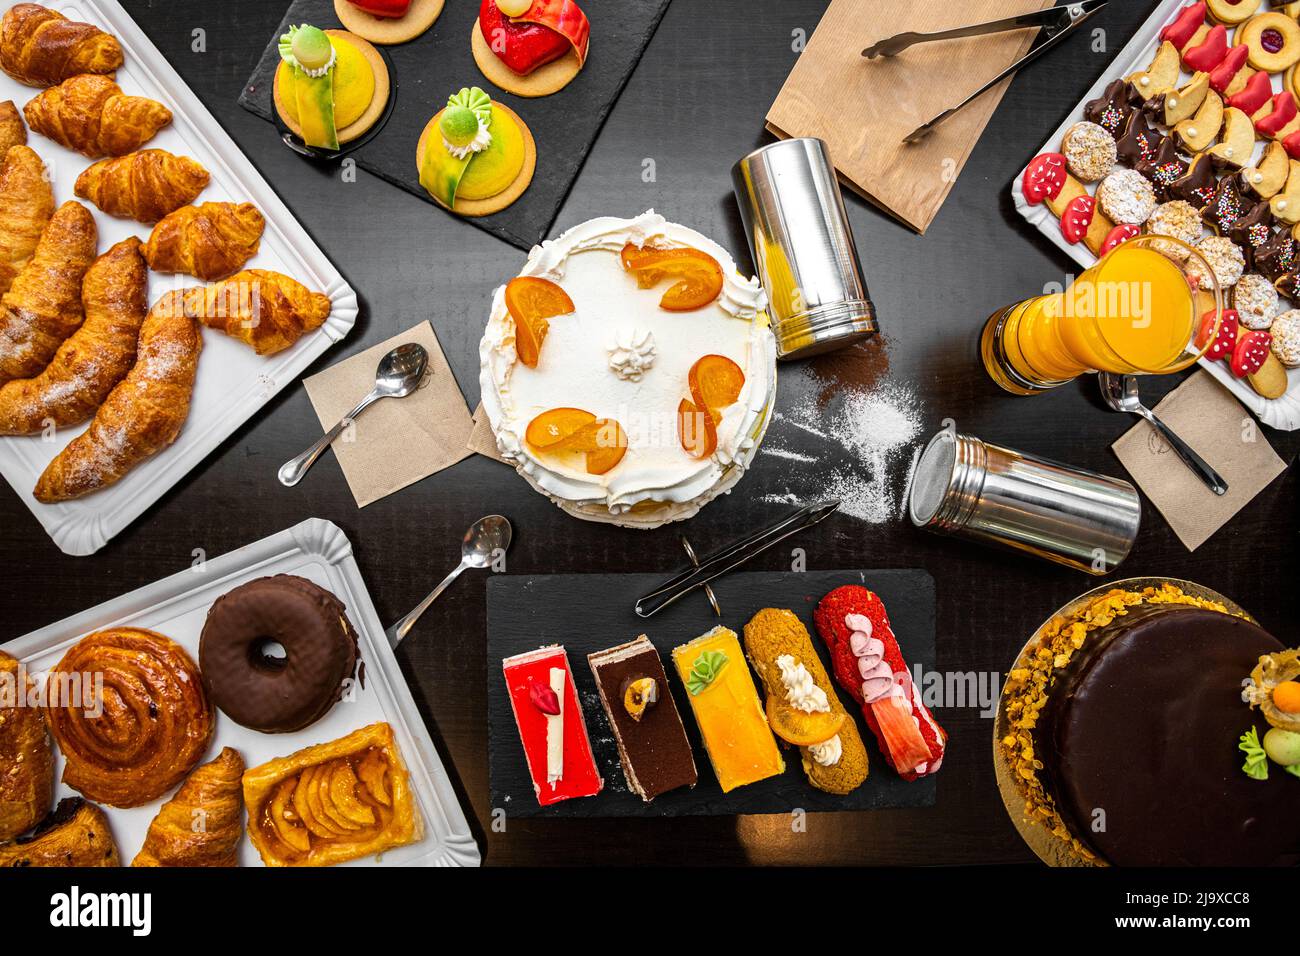 Set of desserts and cake on a black table, cream chocolate, icing sugar, butter croissants, orange juice, tea cakes, sweet snails. Stock Photo